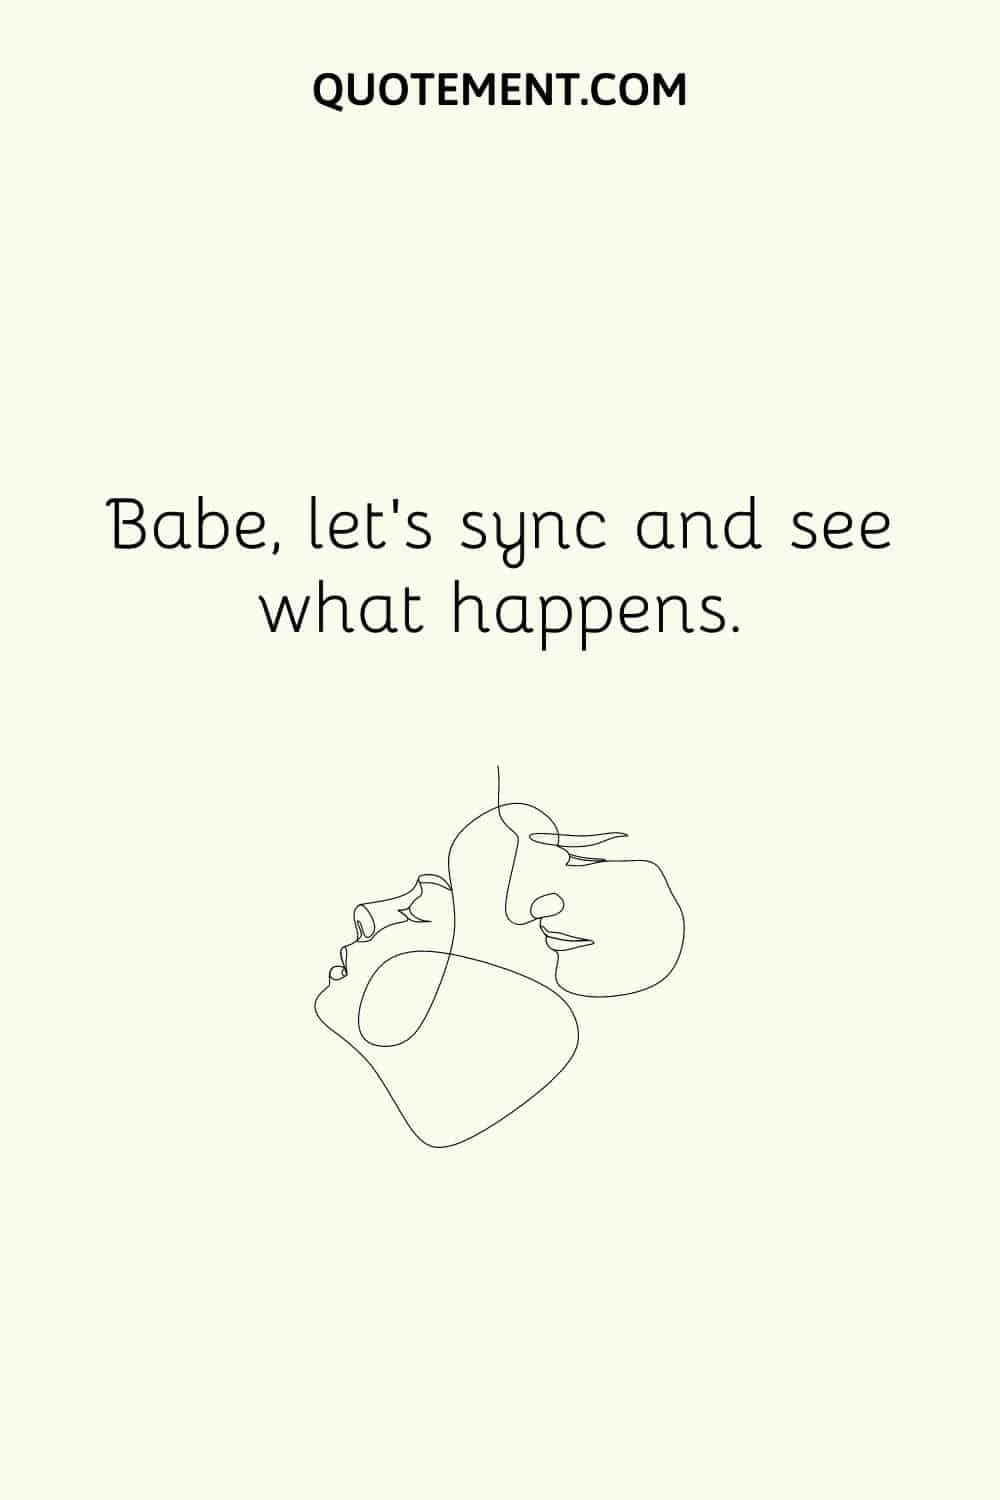 Babe, let's sync and see what happens